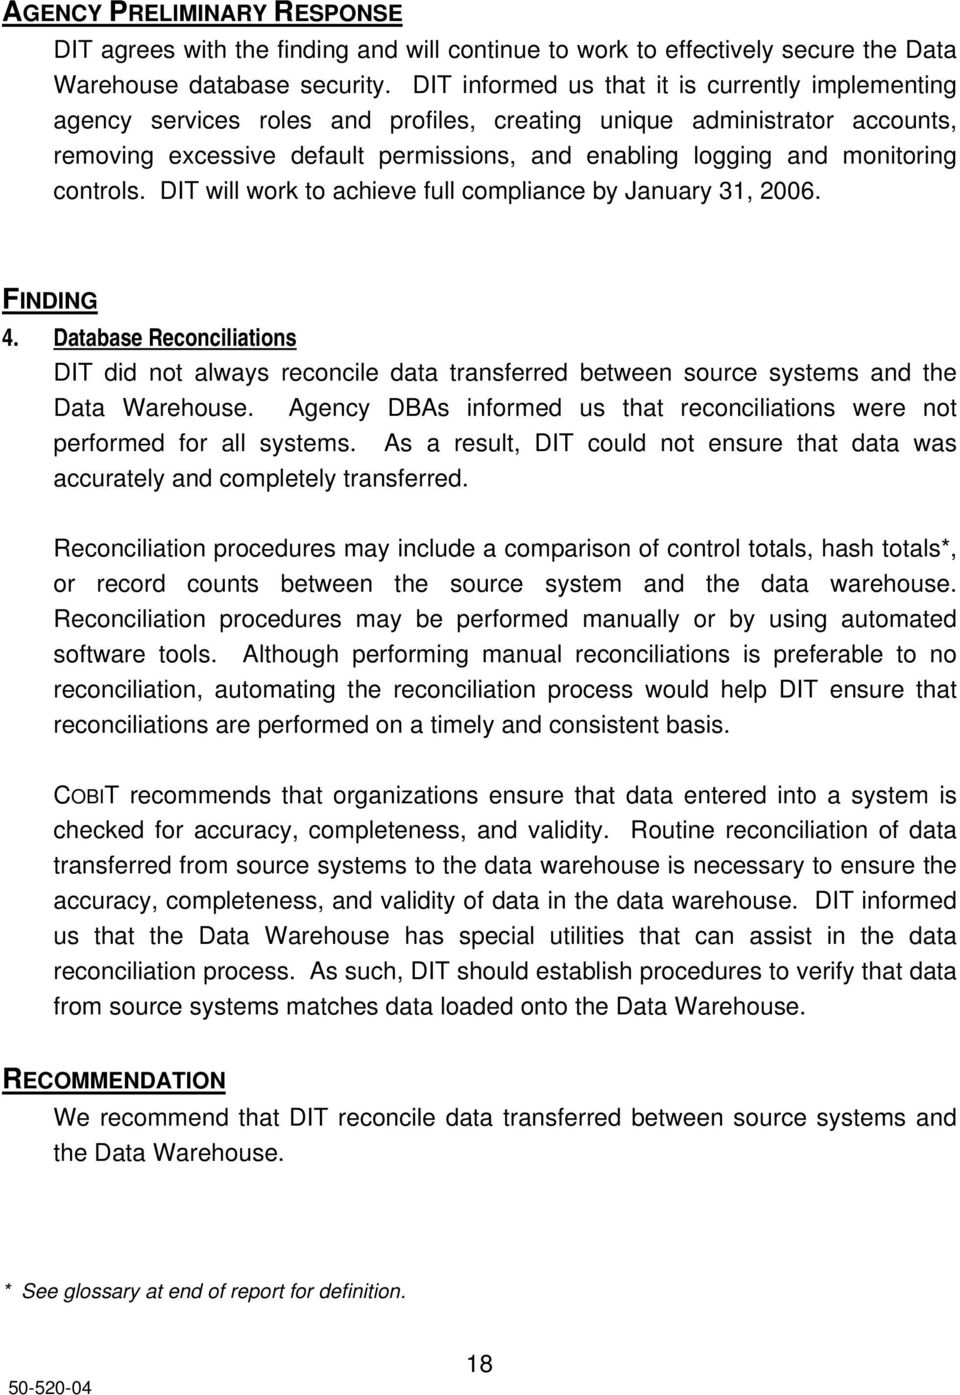 monitoring controls. DIT will work to achieve full compliance by January 31, 2006. FINDING 4.